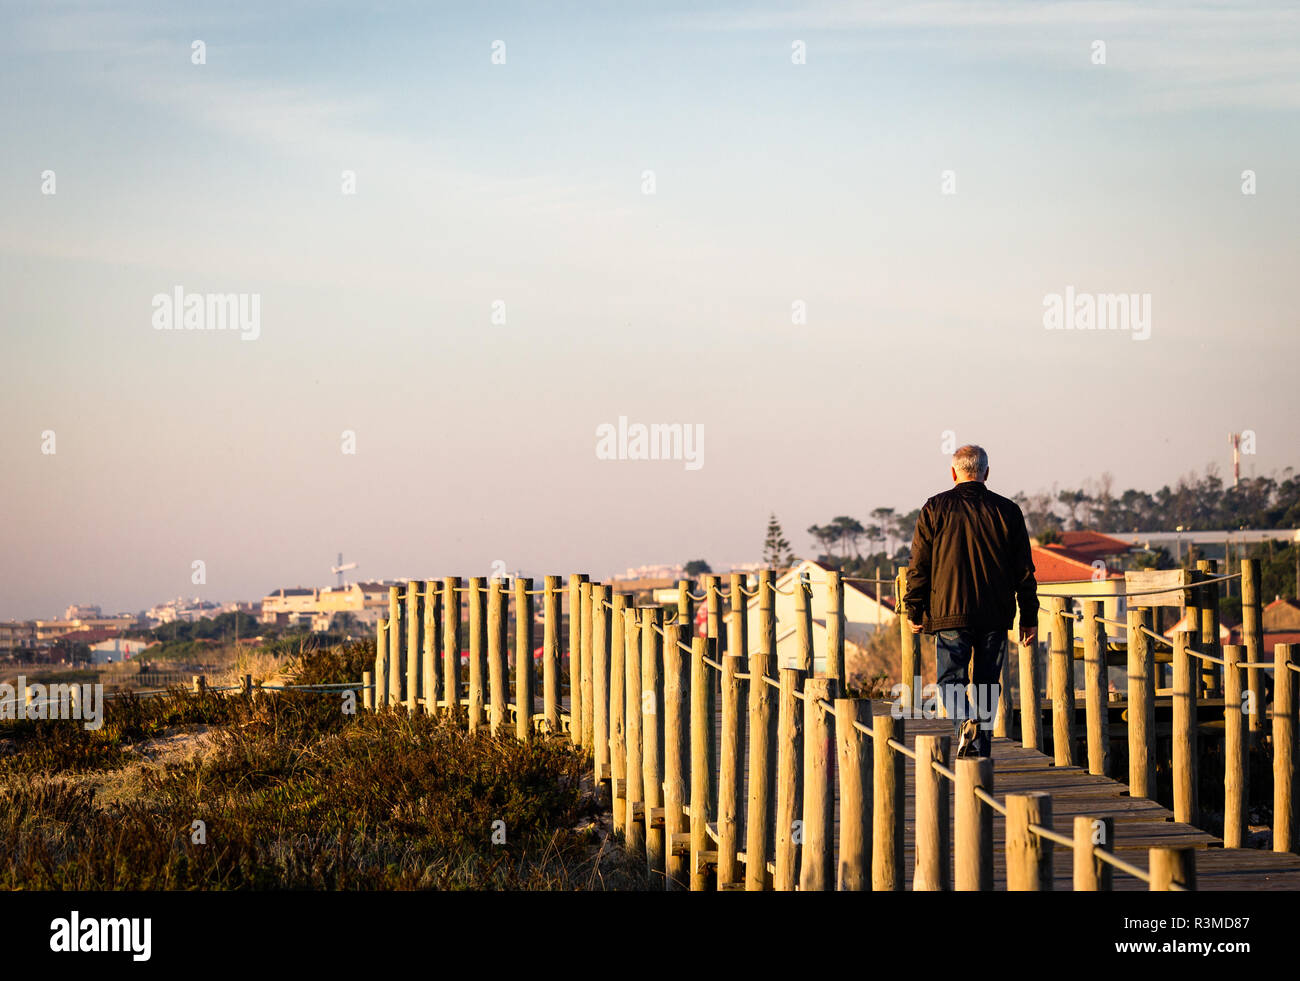 Senior man walks on boardwalk amidst vegetation. Brown coat, jeans. Rear view. Clear day. Copy Space. Stock Photo